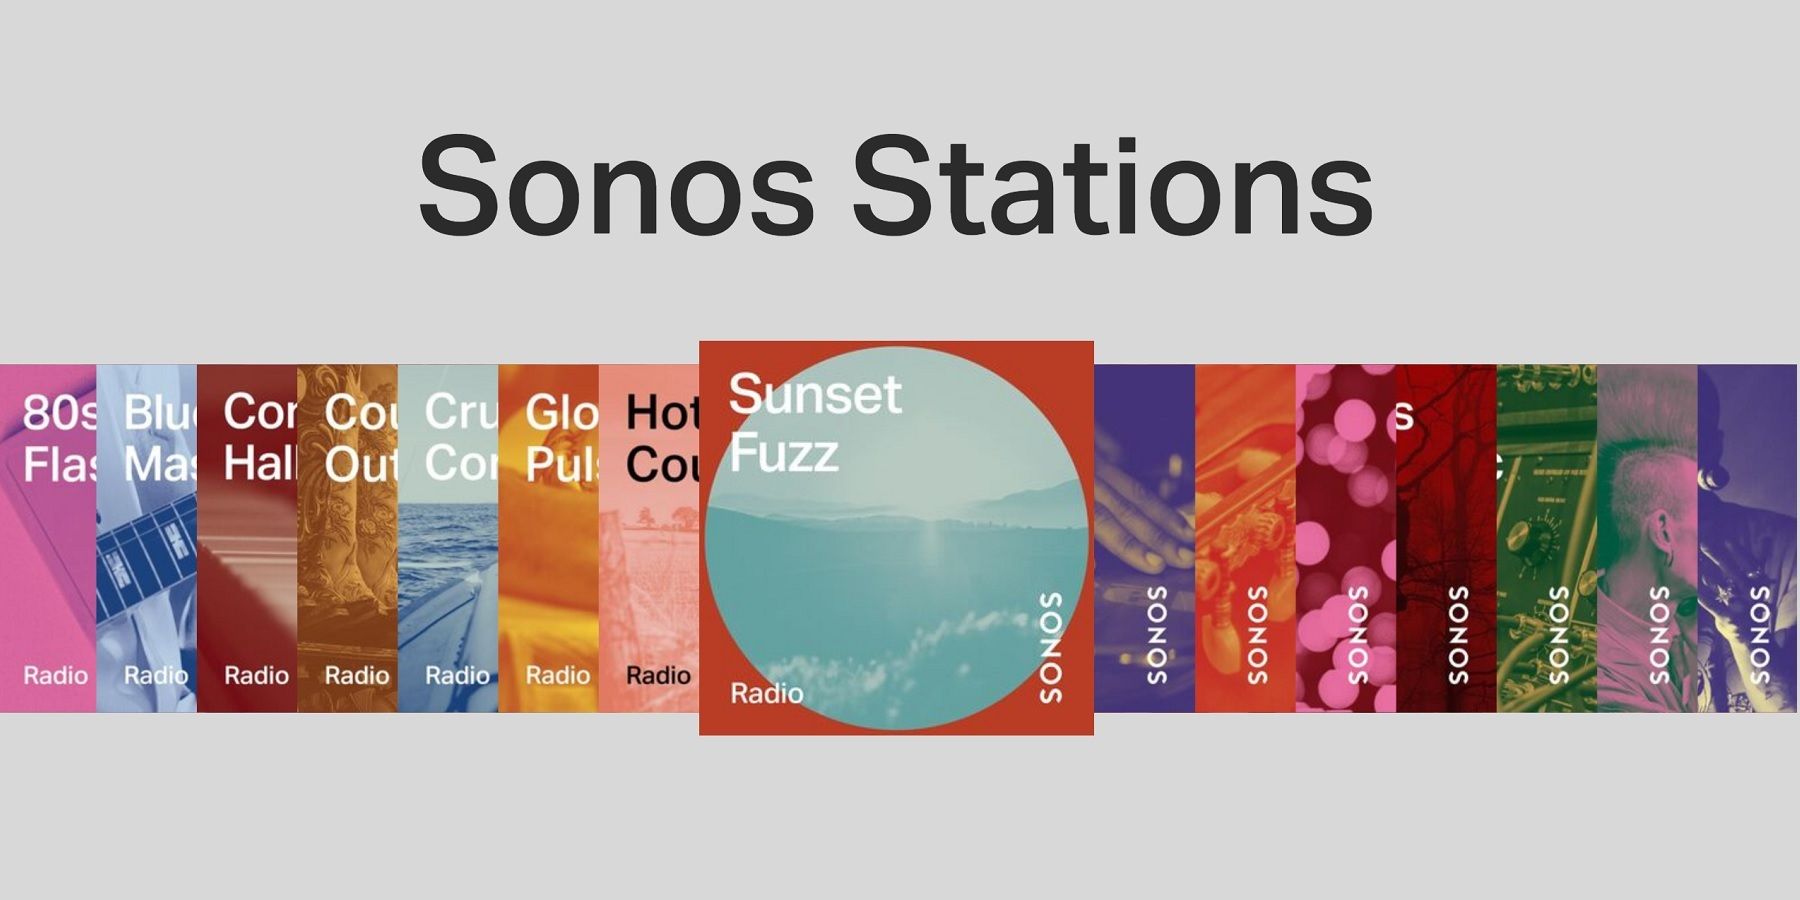 Sonos music stations graphic